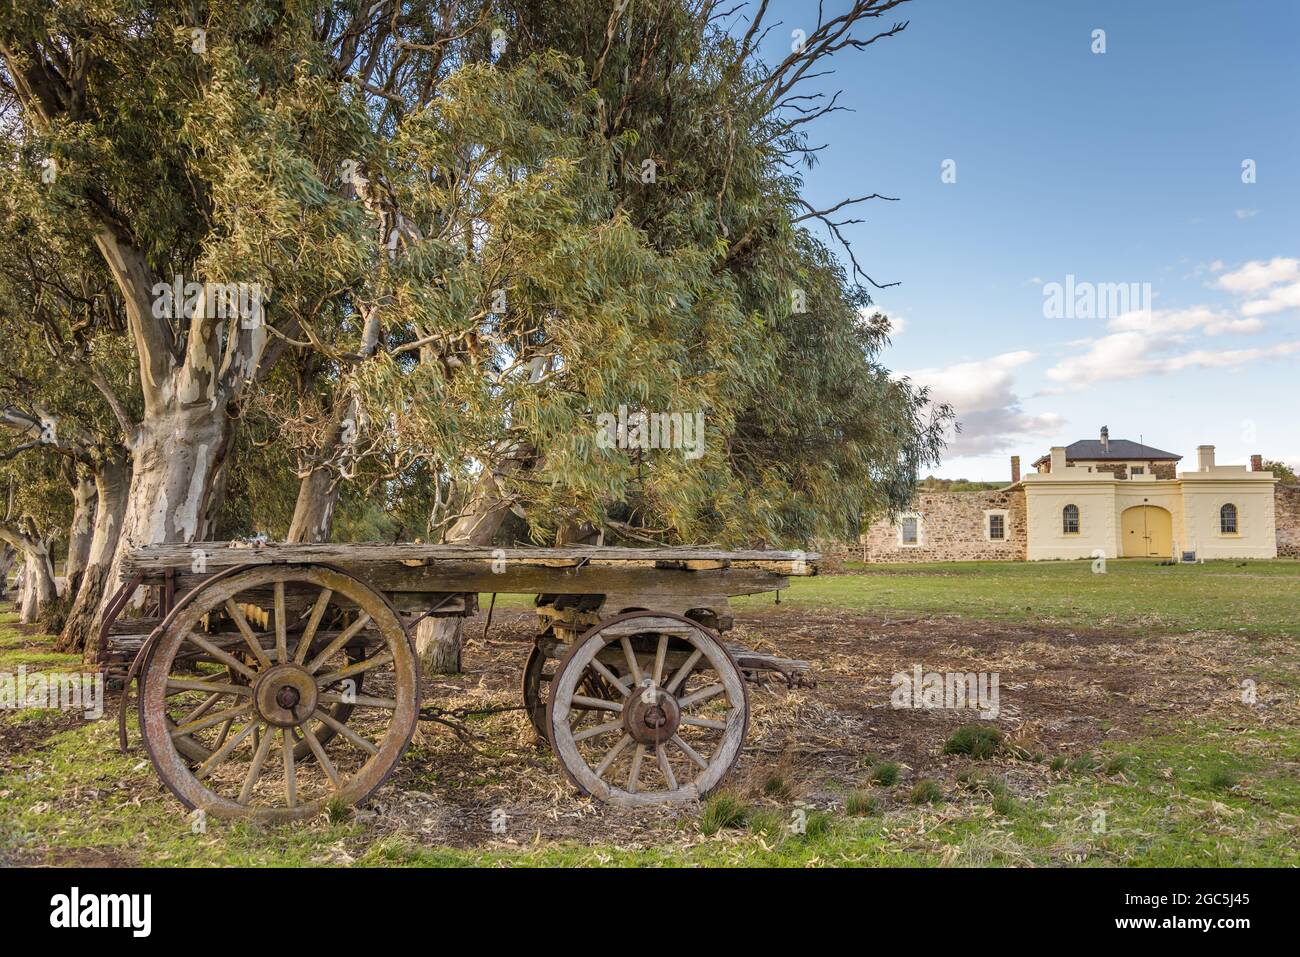 An old bullock wagon relic stands in front of gnarled gum trees and tthe old, heritage listed, Burra Colonial Court House in South Australia. Stock Photo